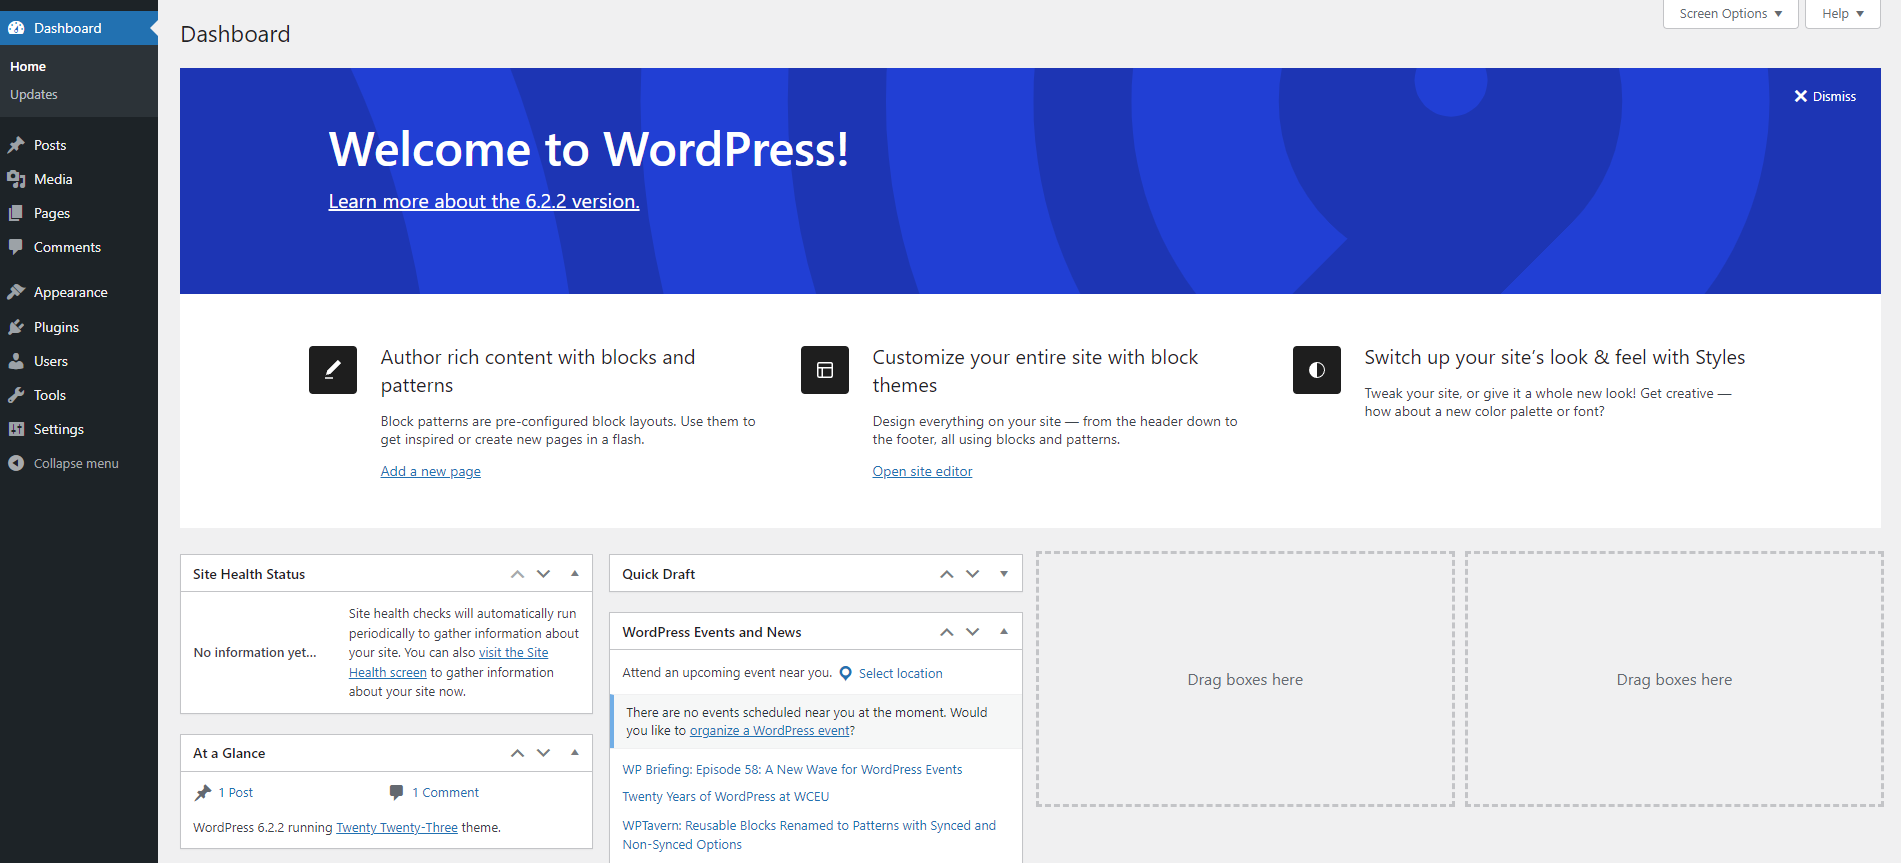 WordPress's admin panel, where users can manage their blog and customize their website